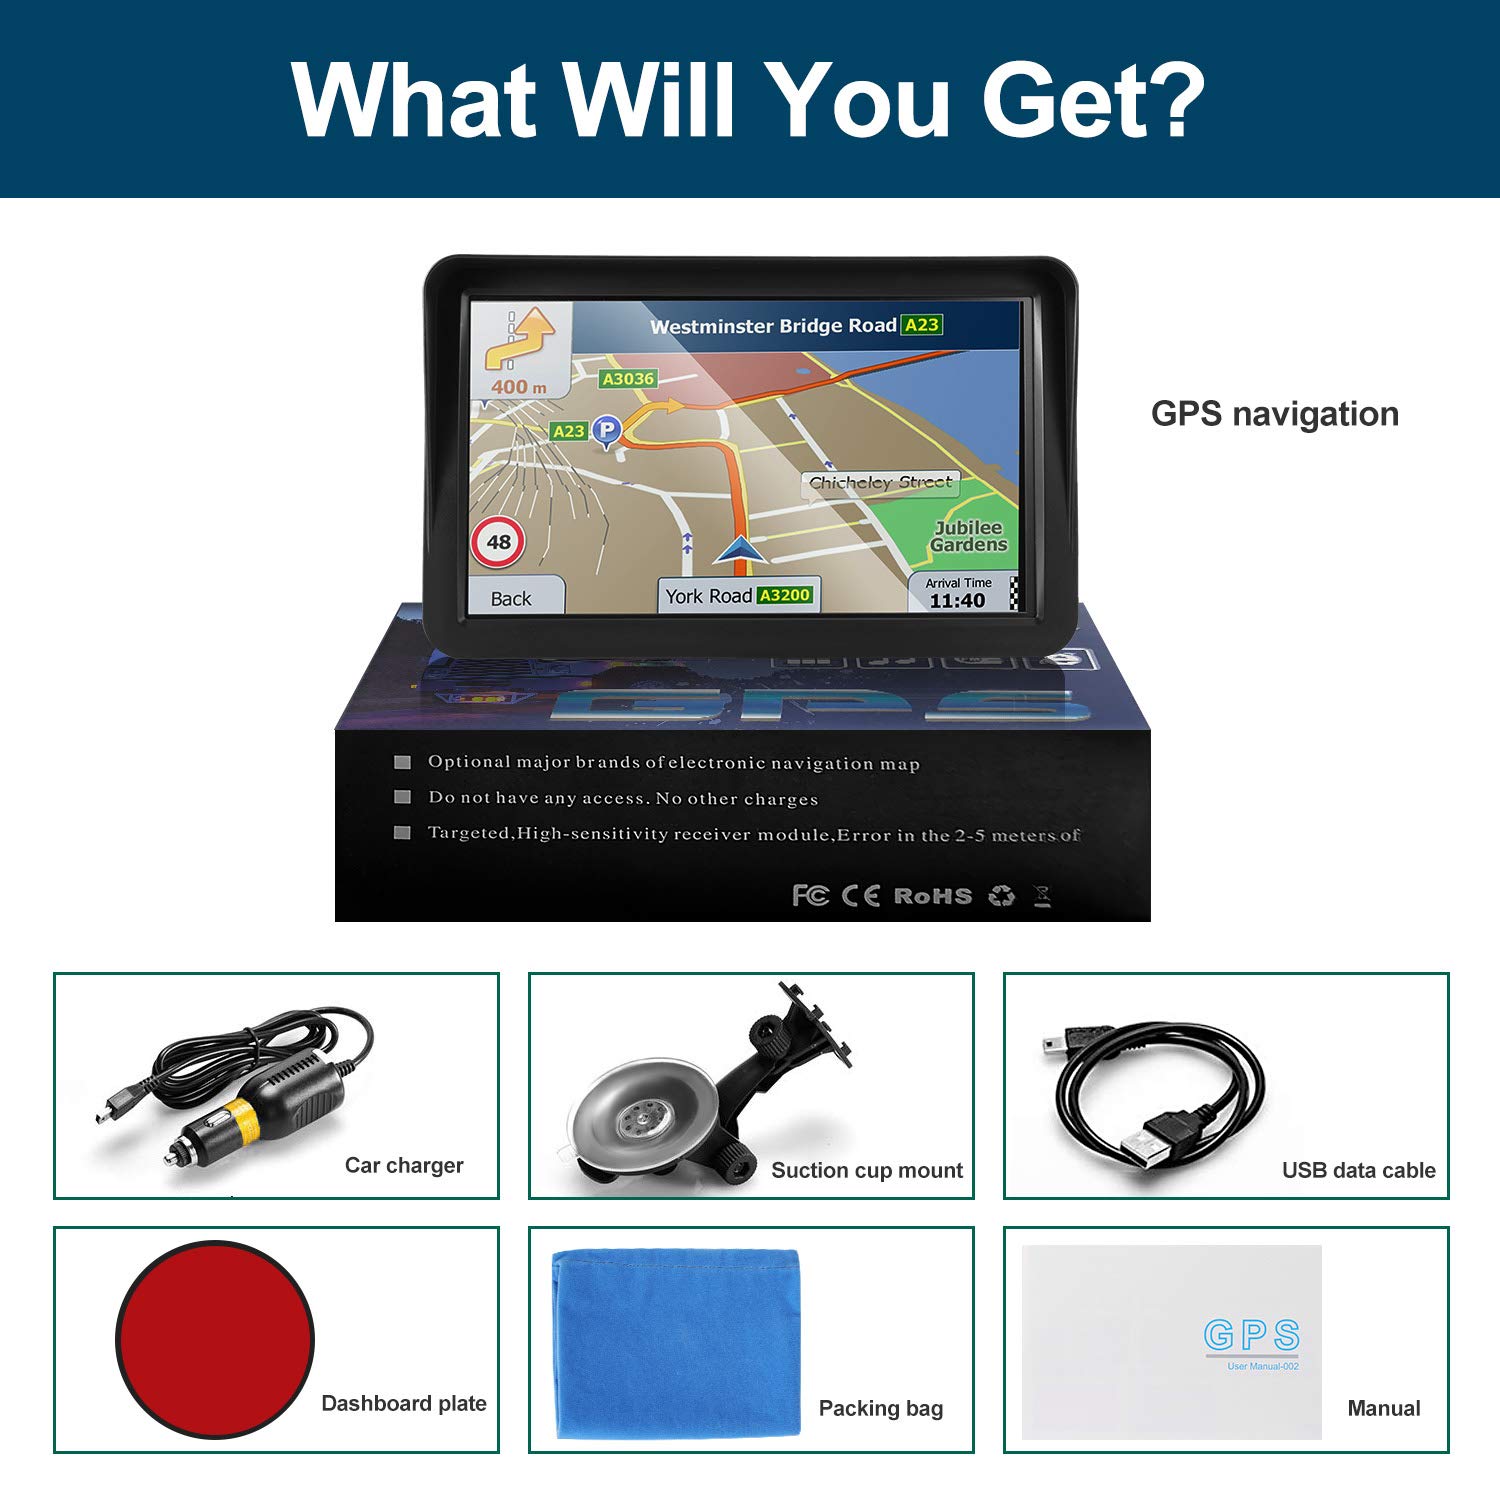 GPS Navigation for Car,Latest 2023 Map, 9 inch Touch Screen Real Voice Spoken Turn-by-Turn Direction Reminding Navigation System for Cars, GPS Satellite Navigator with Free Lifetime Map Update